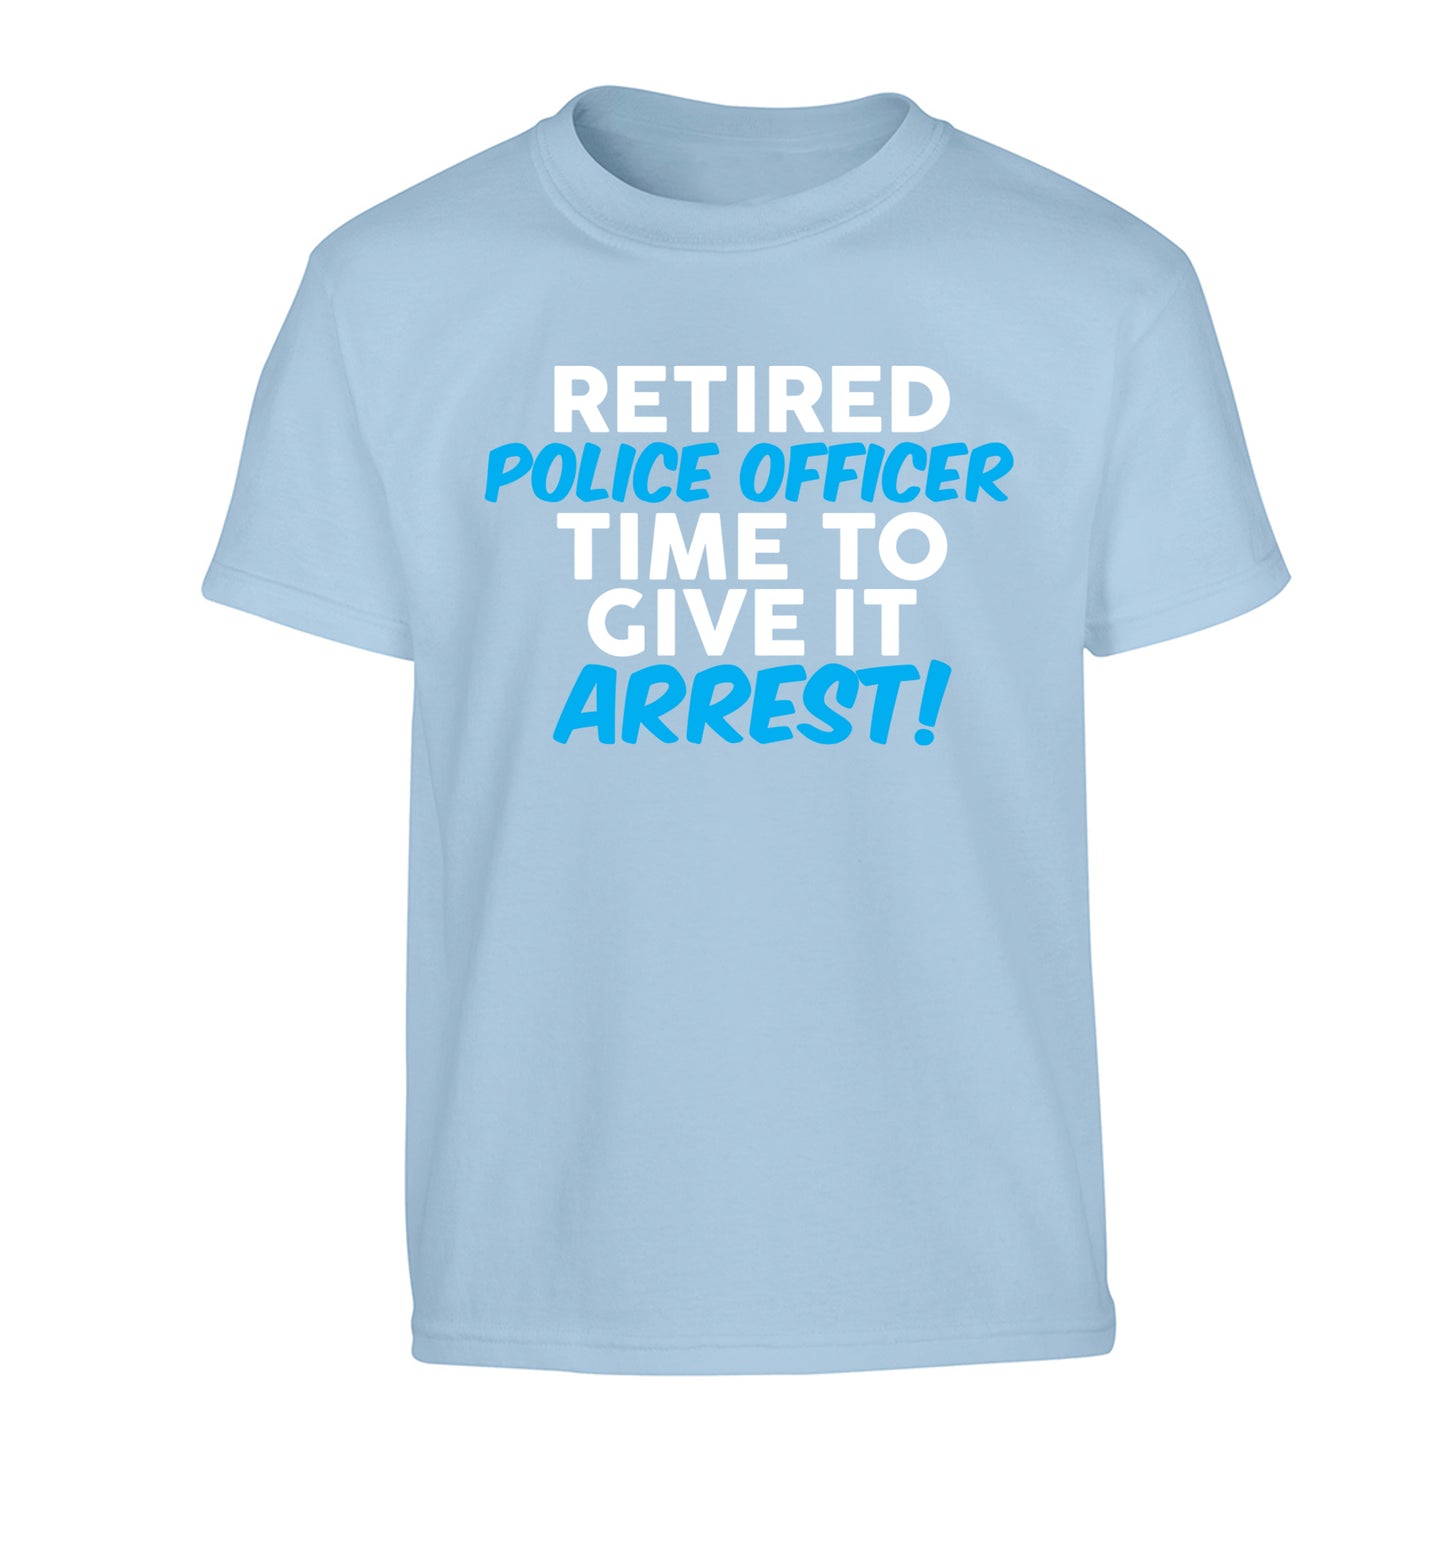 Retired police officer time to give it arrest Children's light blue Tshirt 12-13 Years